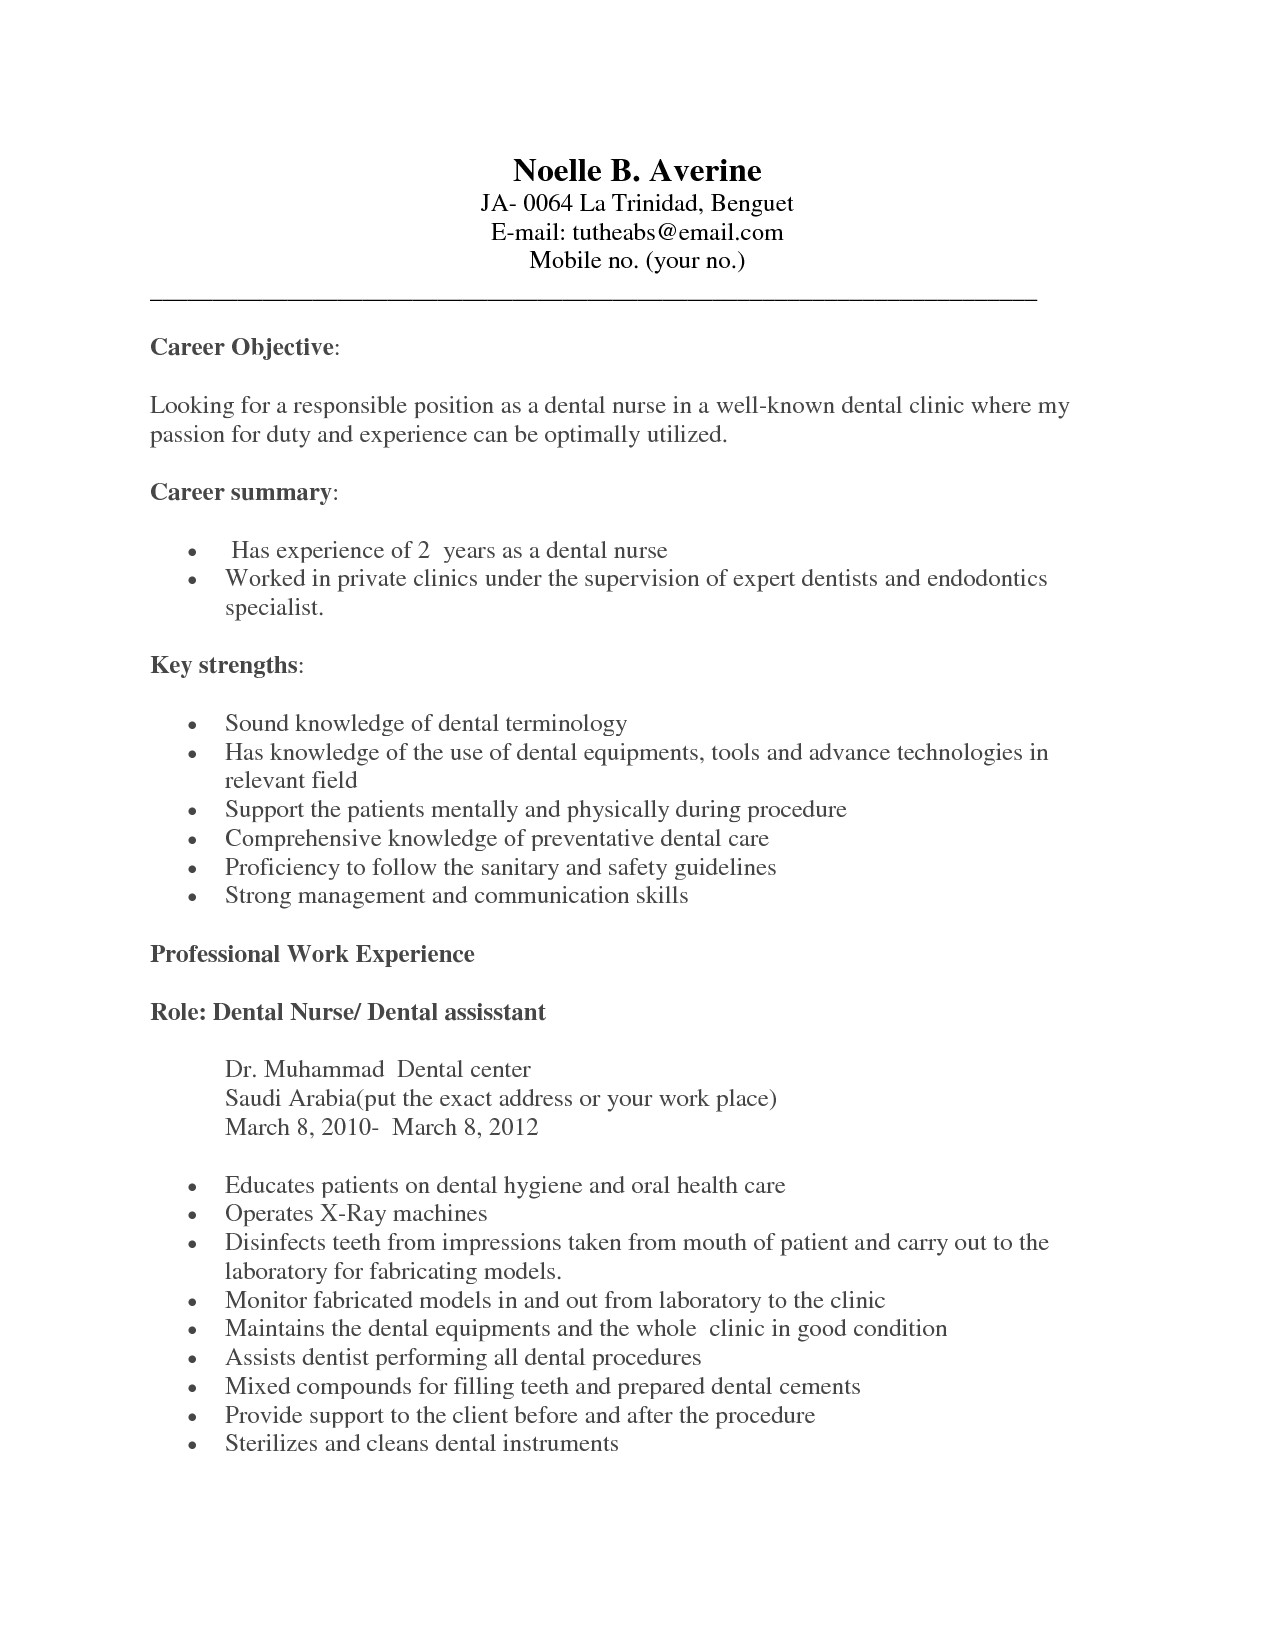 dental assistant resume no experience